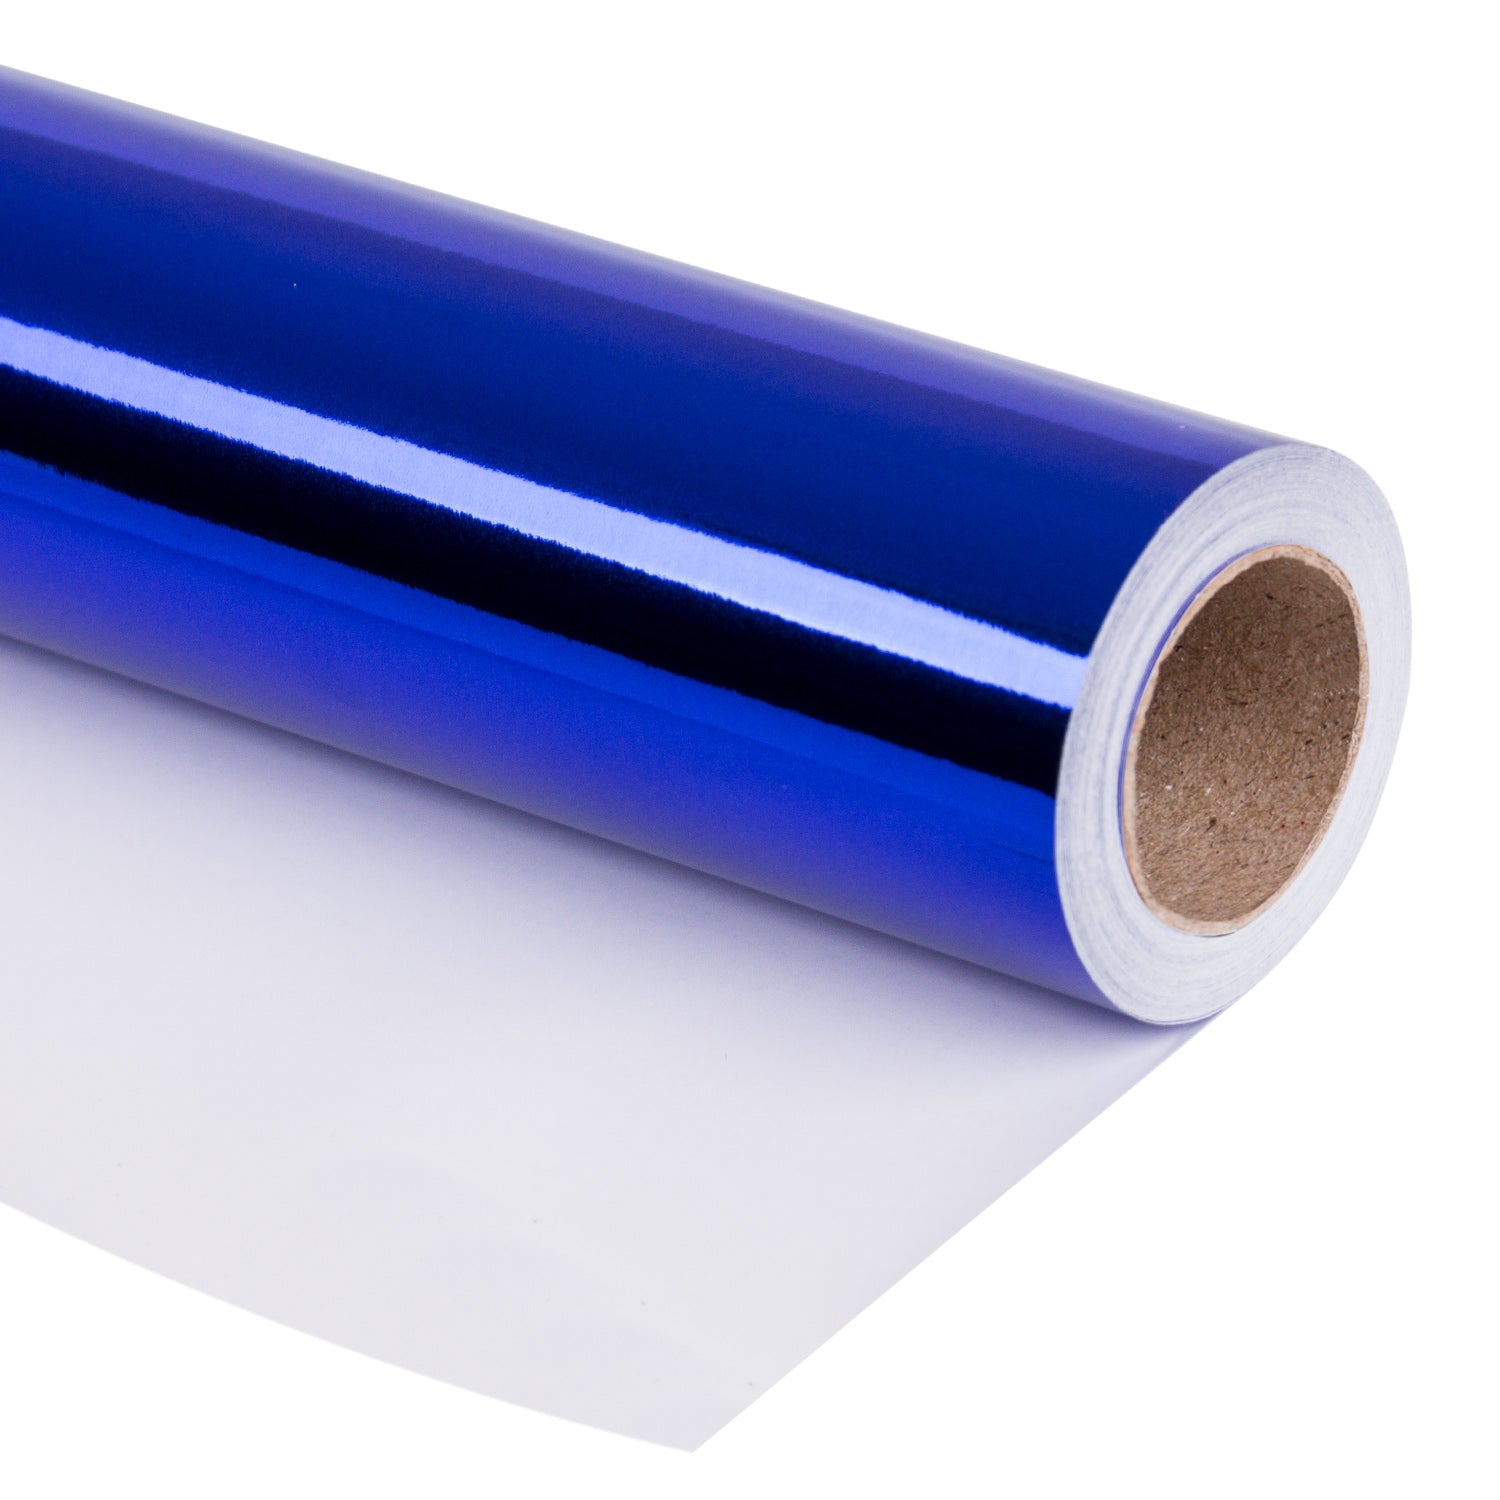 Glossy Metallic Wrapping Paper Roll Royal Blue Ream Wholesale Wrapaholic